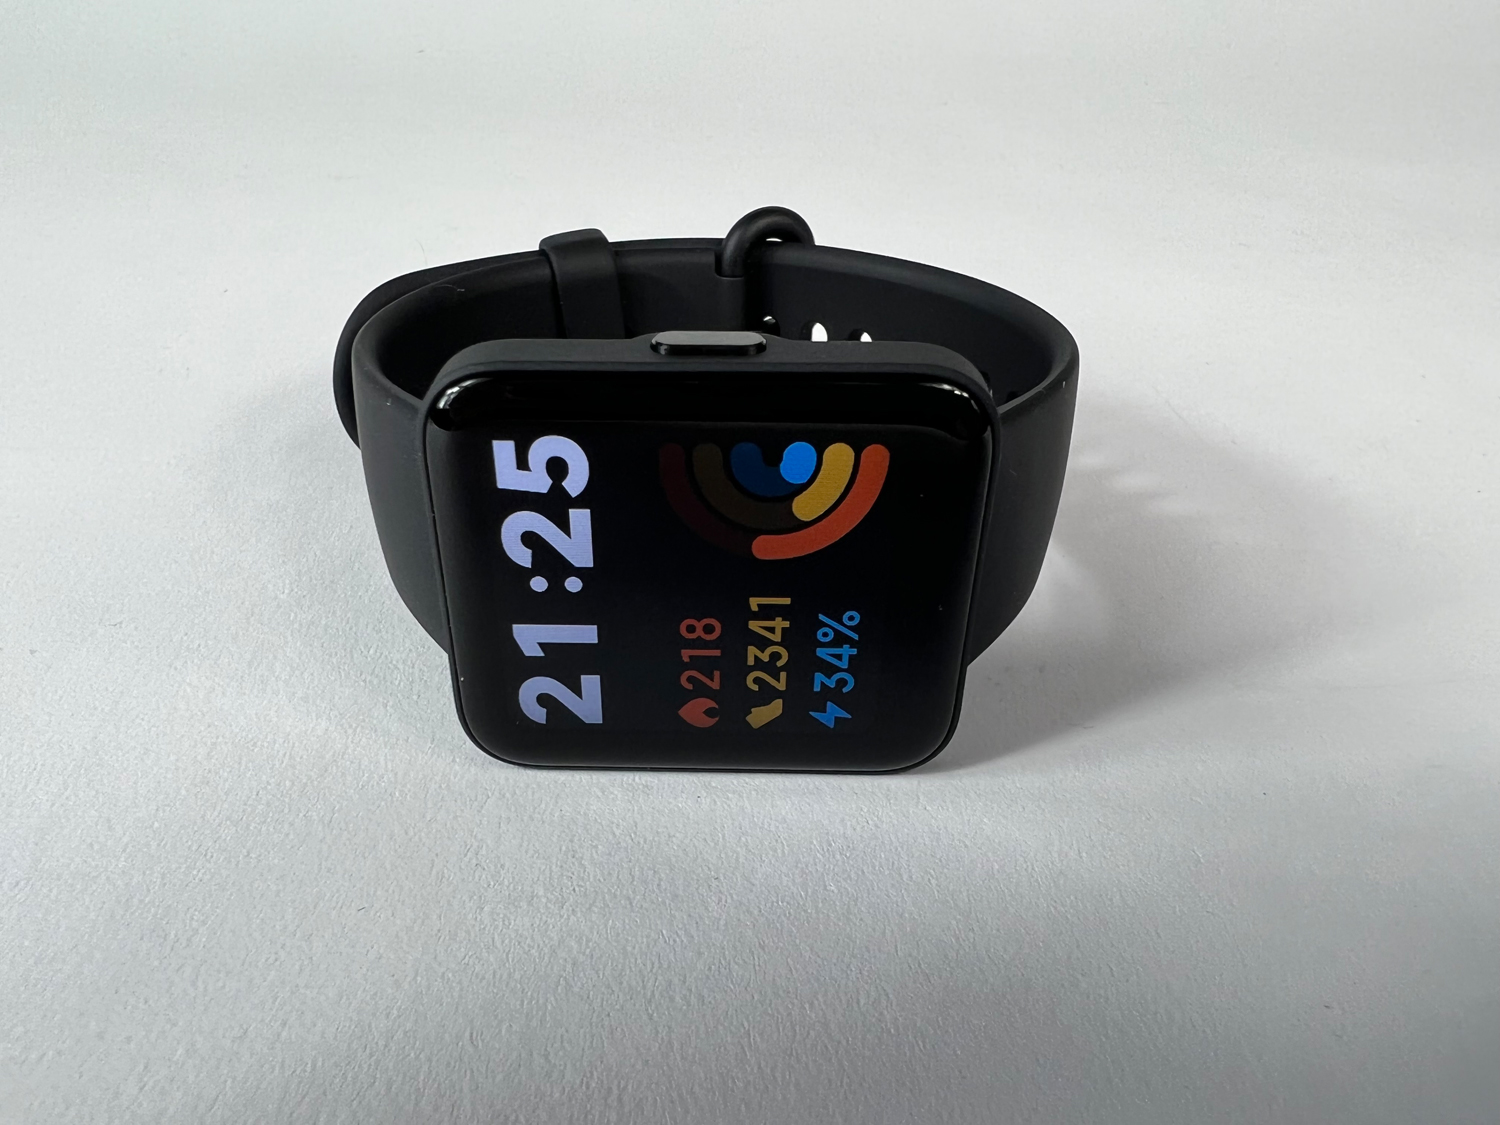  Xiaomi Redmi Watch 2 Lite, 100+ Fitness Modes, 1.55 Colorful  Touch Display, 5 ATM Water Resistance, SPO₂ Measurement, 24-Hour Heart Rate  Tracking, Multi-System Standalone GPS, Black : Electronics